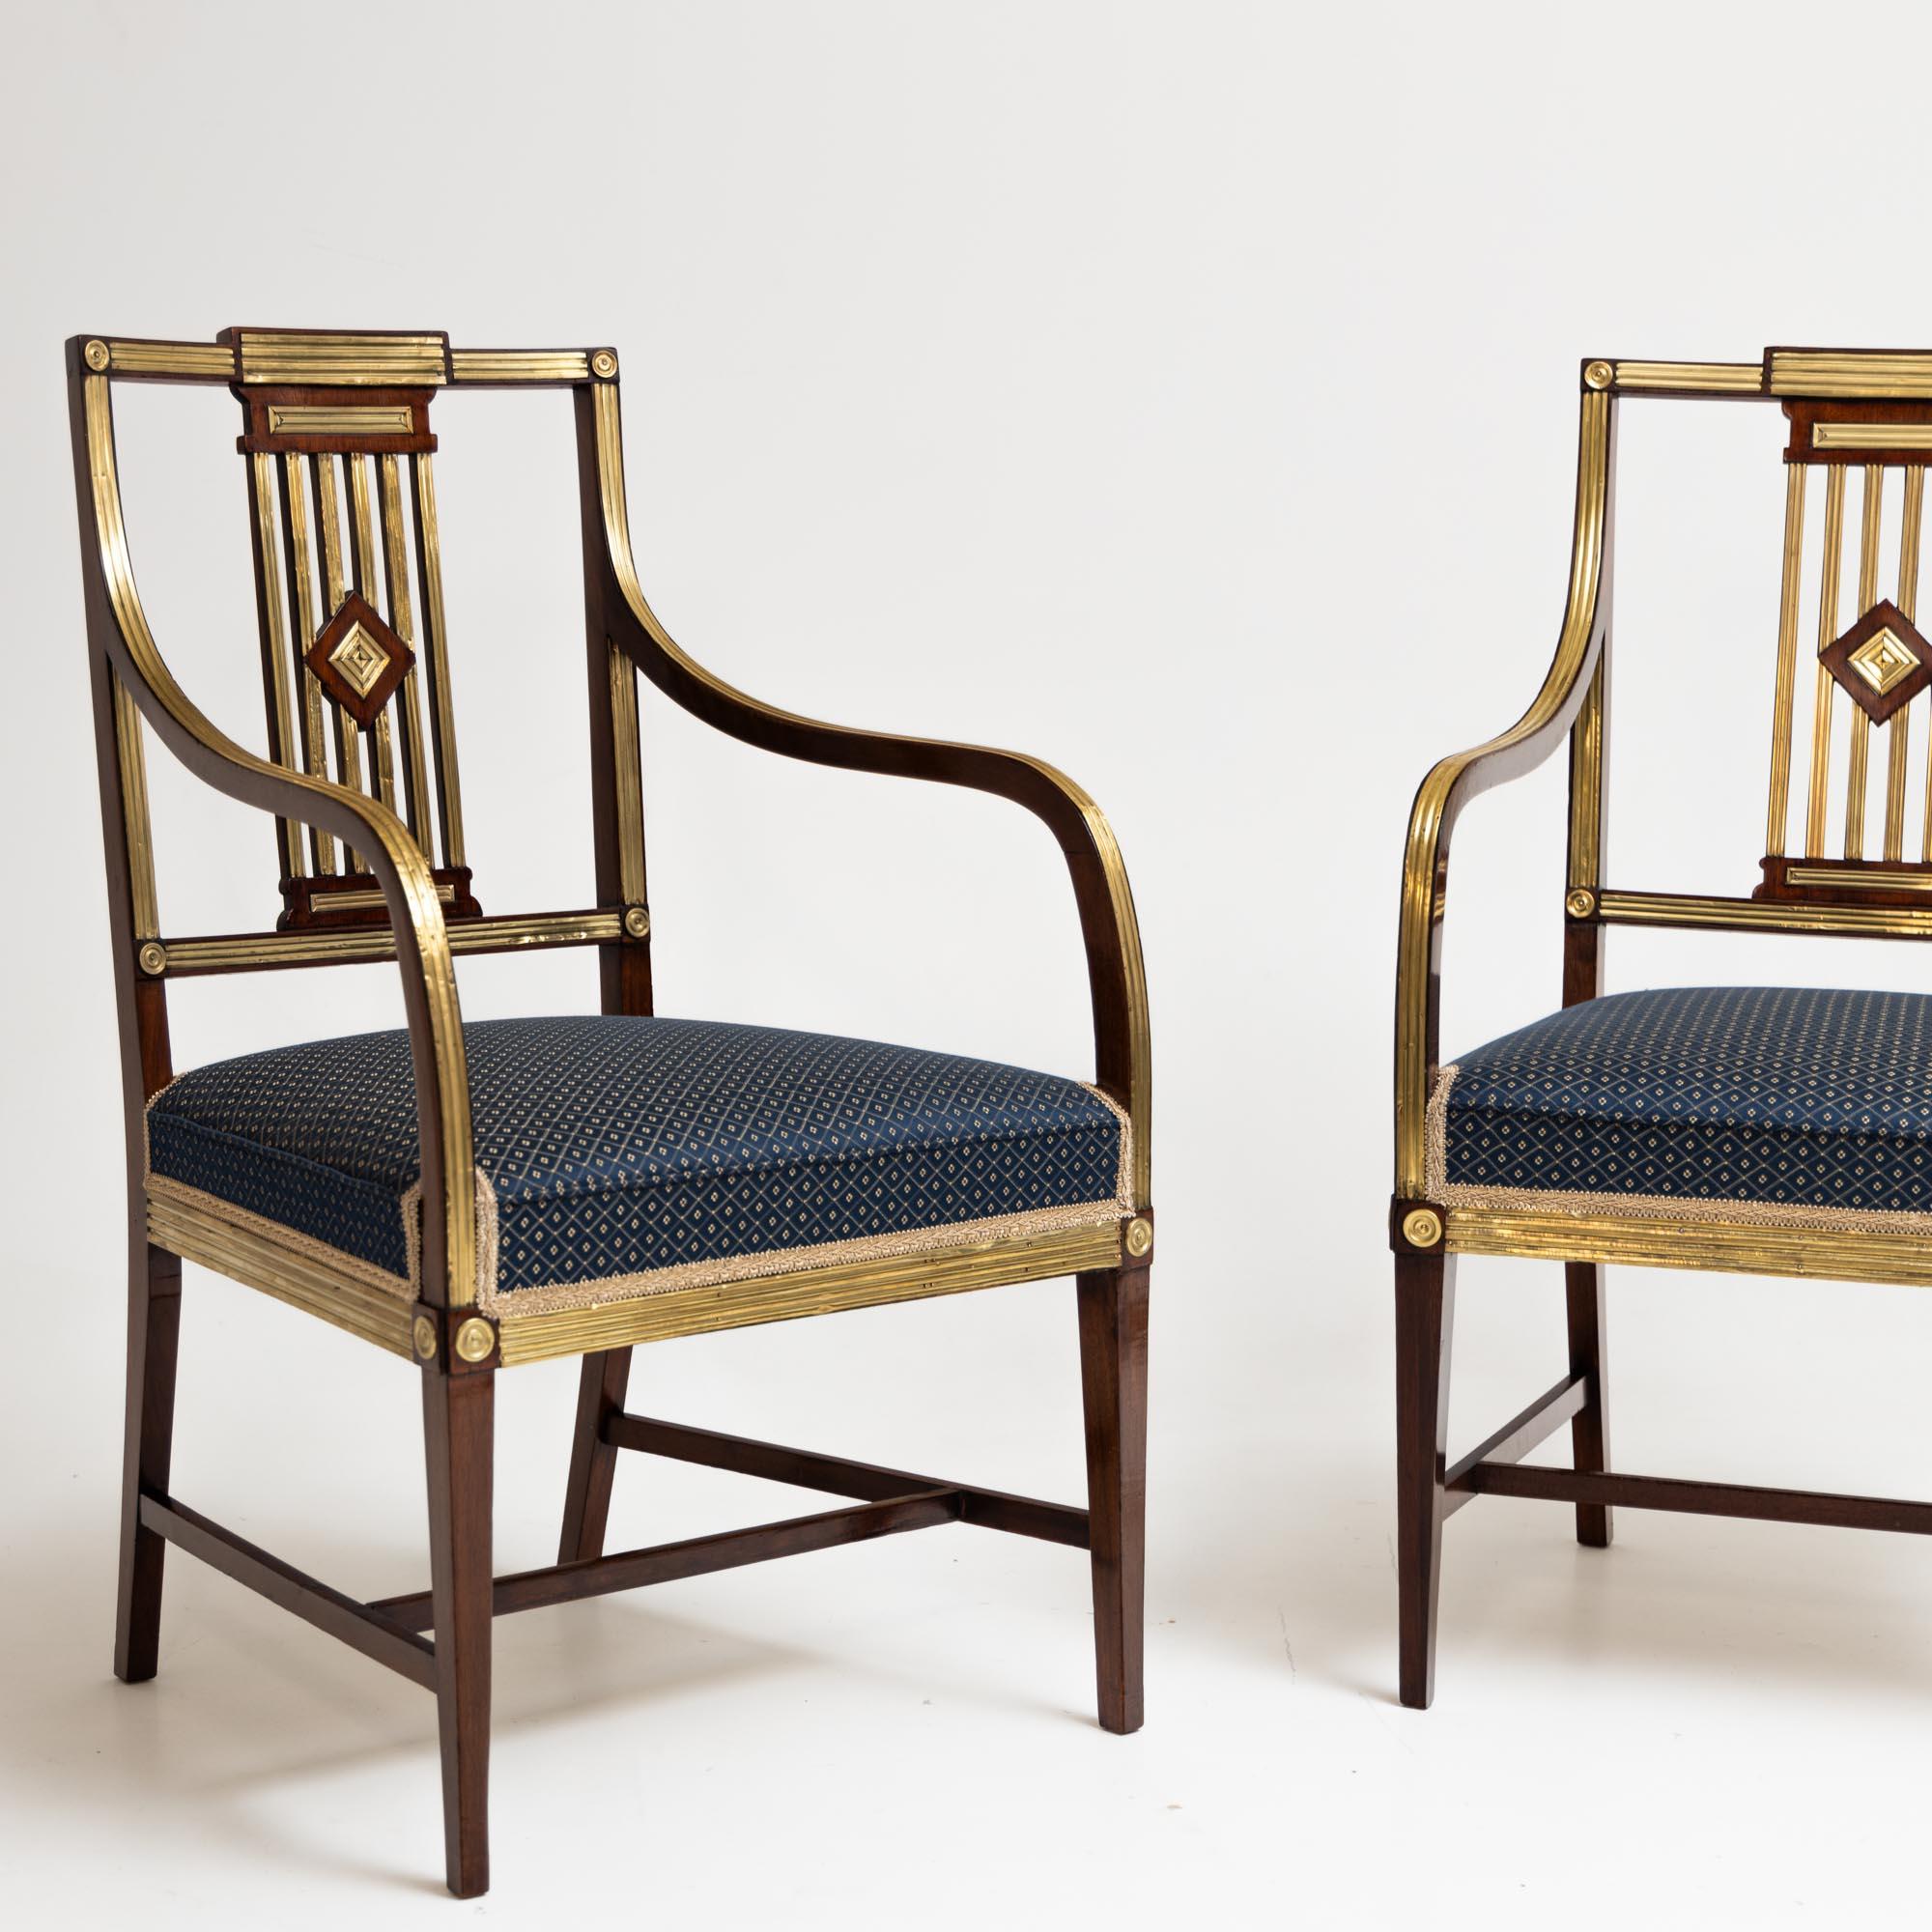 Empire Pair of Neoclassical Dining Room Chairs, Brass, Baltic States, Late 18th Century For Sale